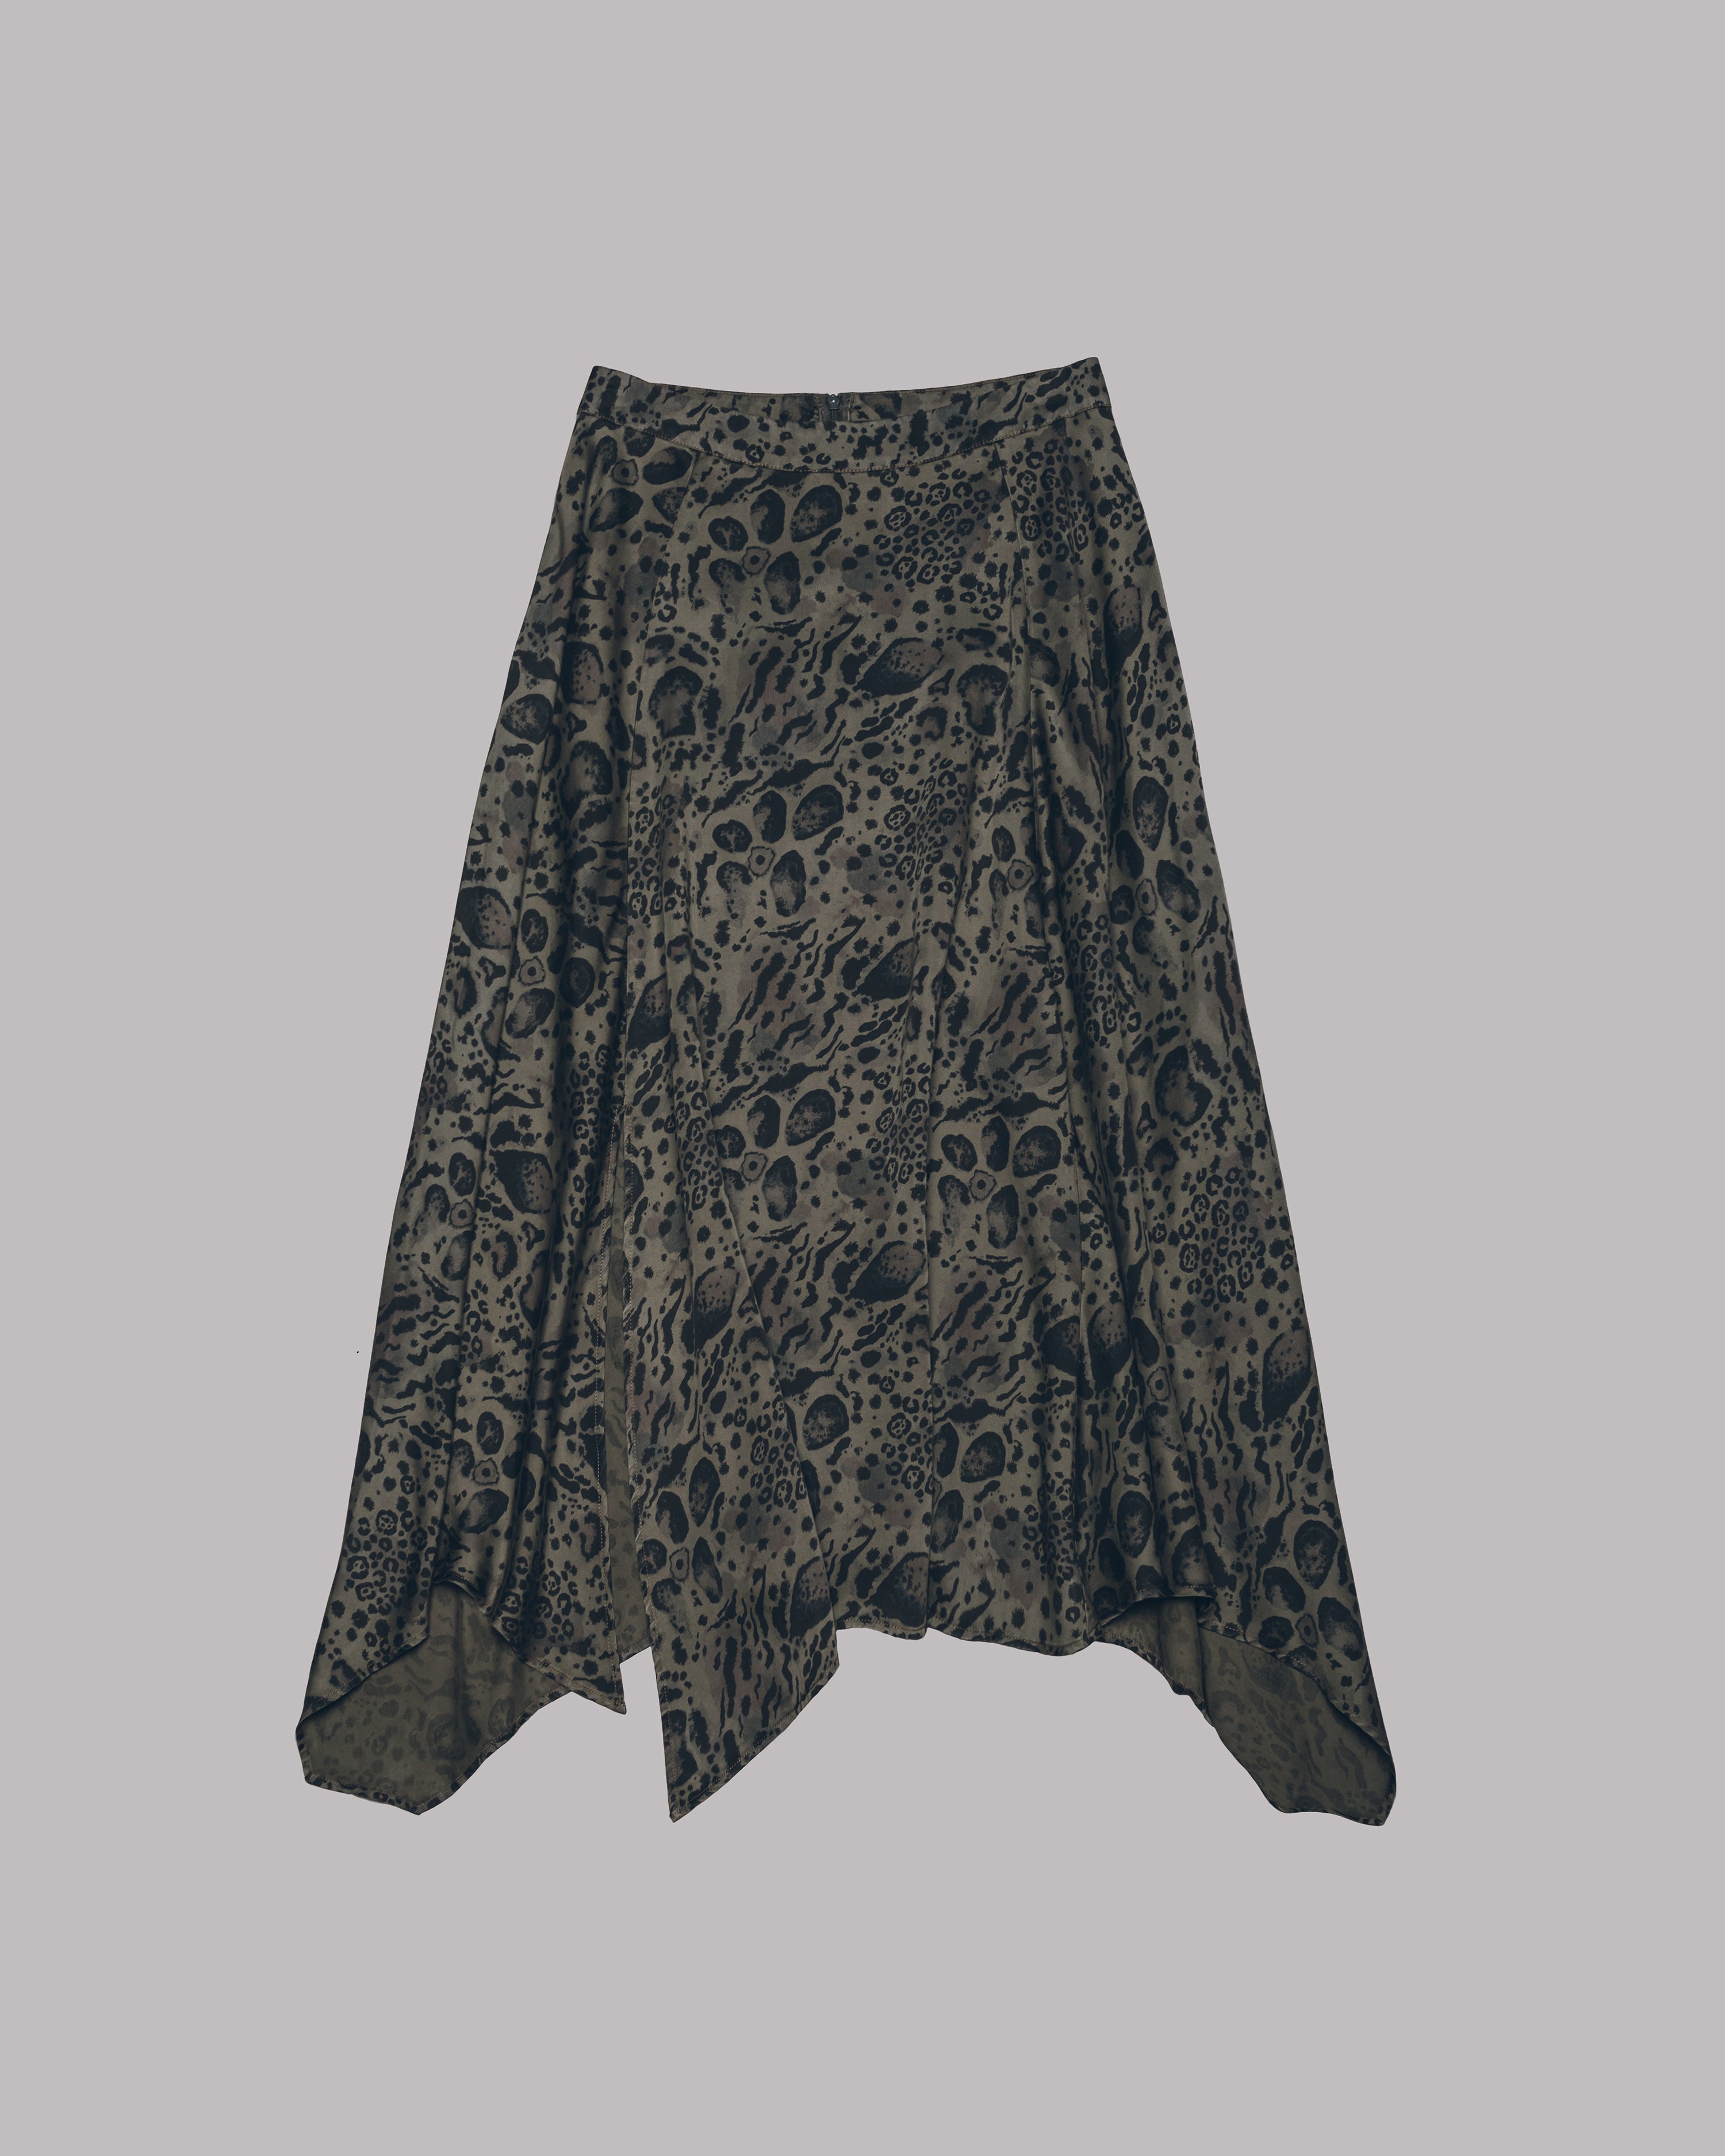 The Printed Green Chill Skirt